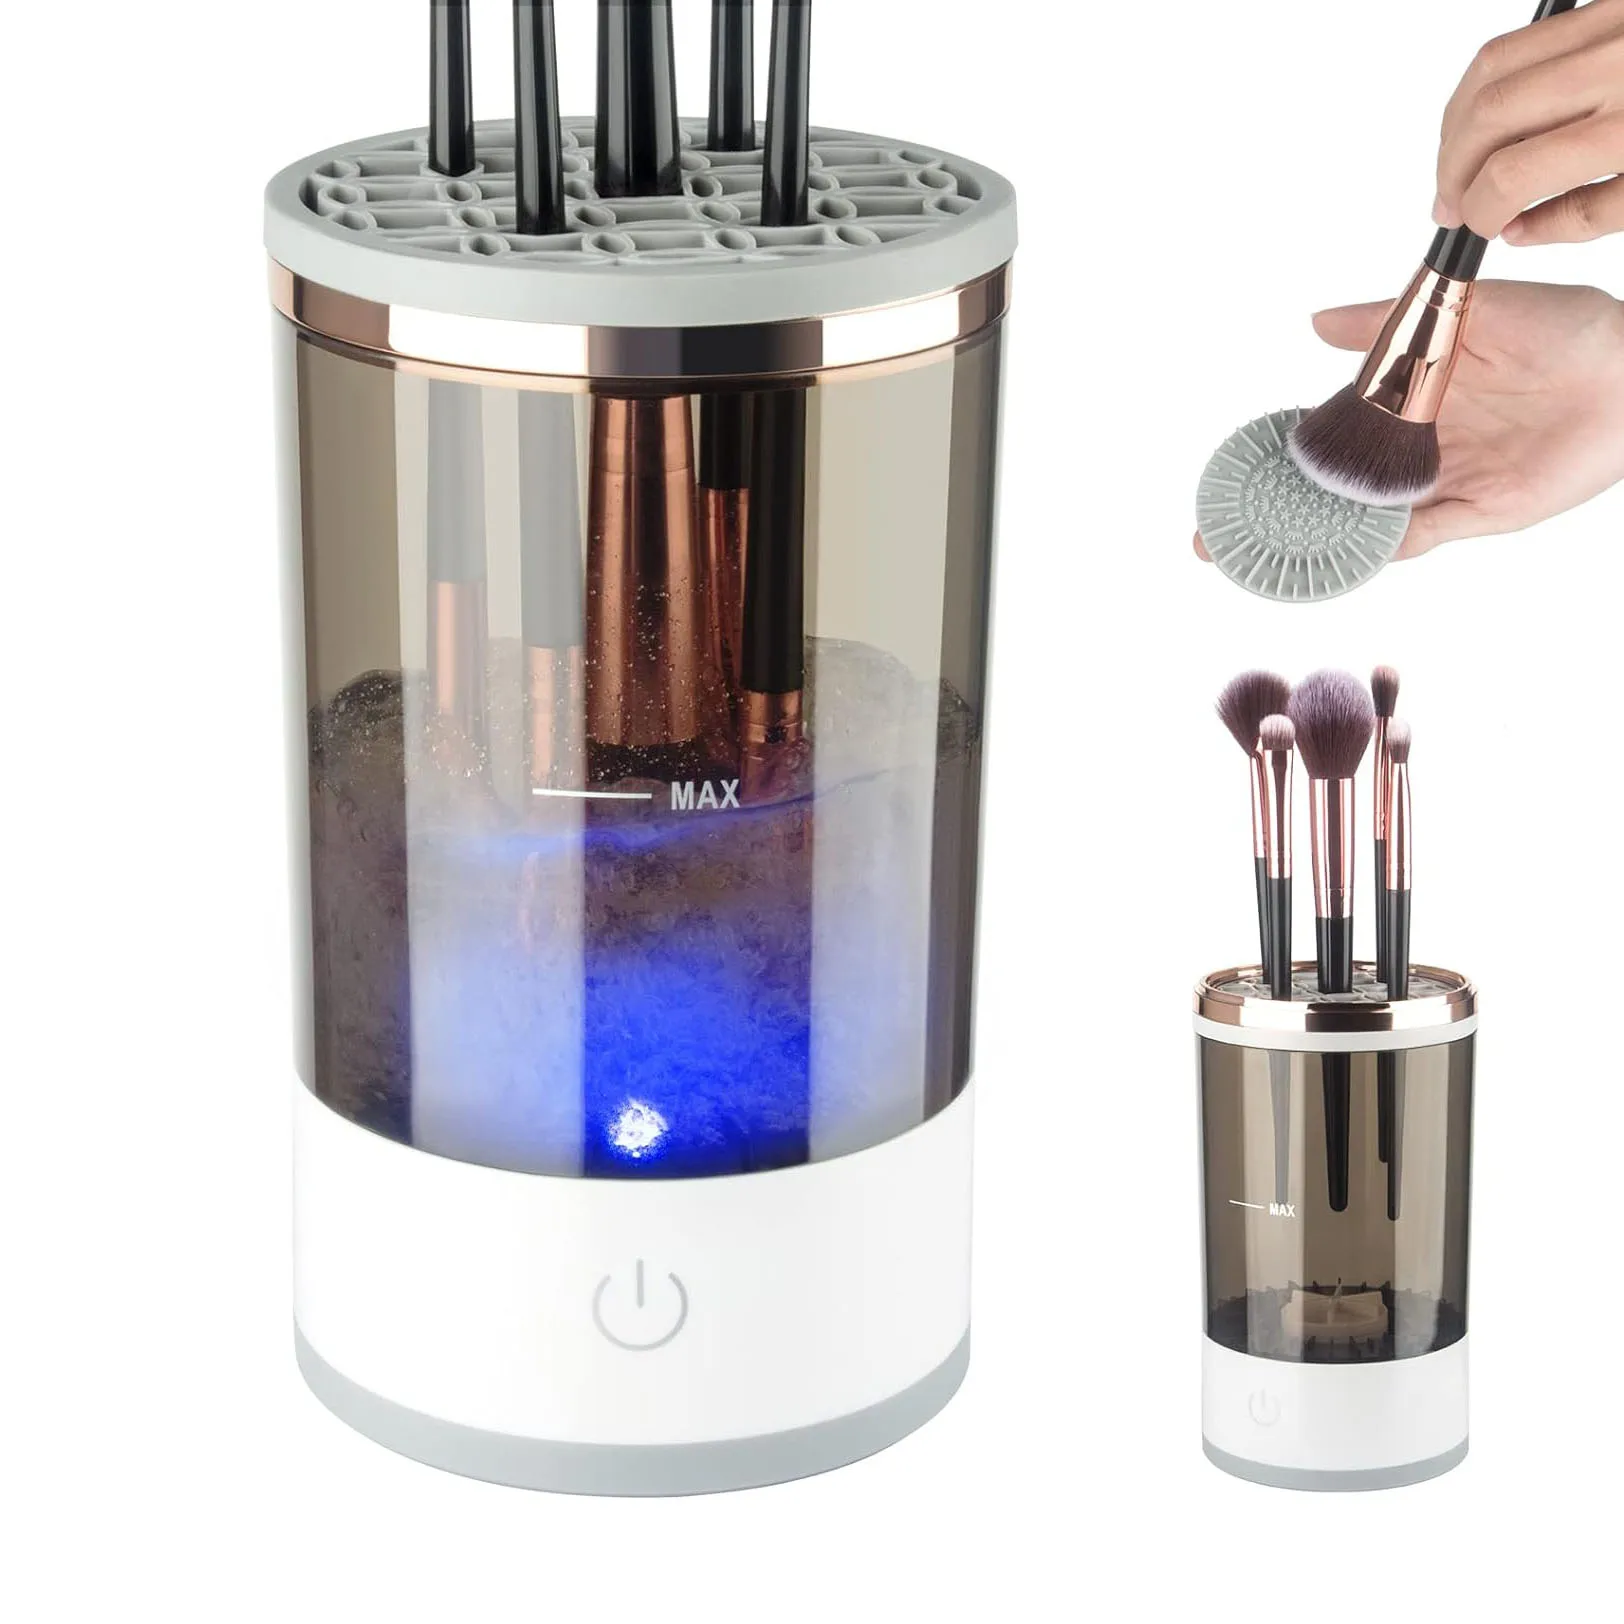 

Portable Automatic USB Cosmetic Brushes Cleaner Spinner Makeup Brush Washing Machine Dryer Electric Makeup Brush Cleaner Machine